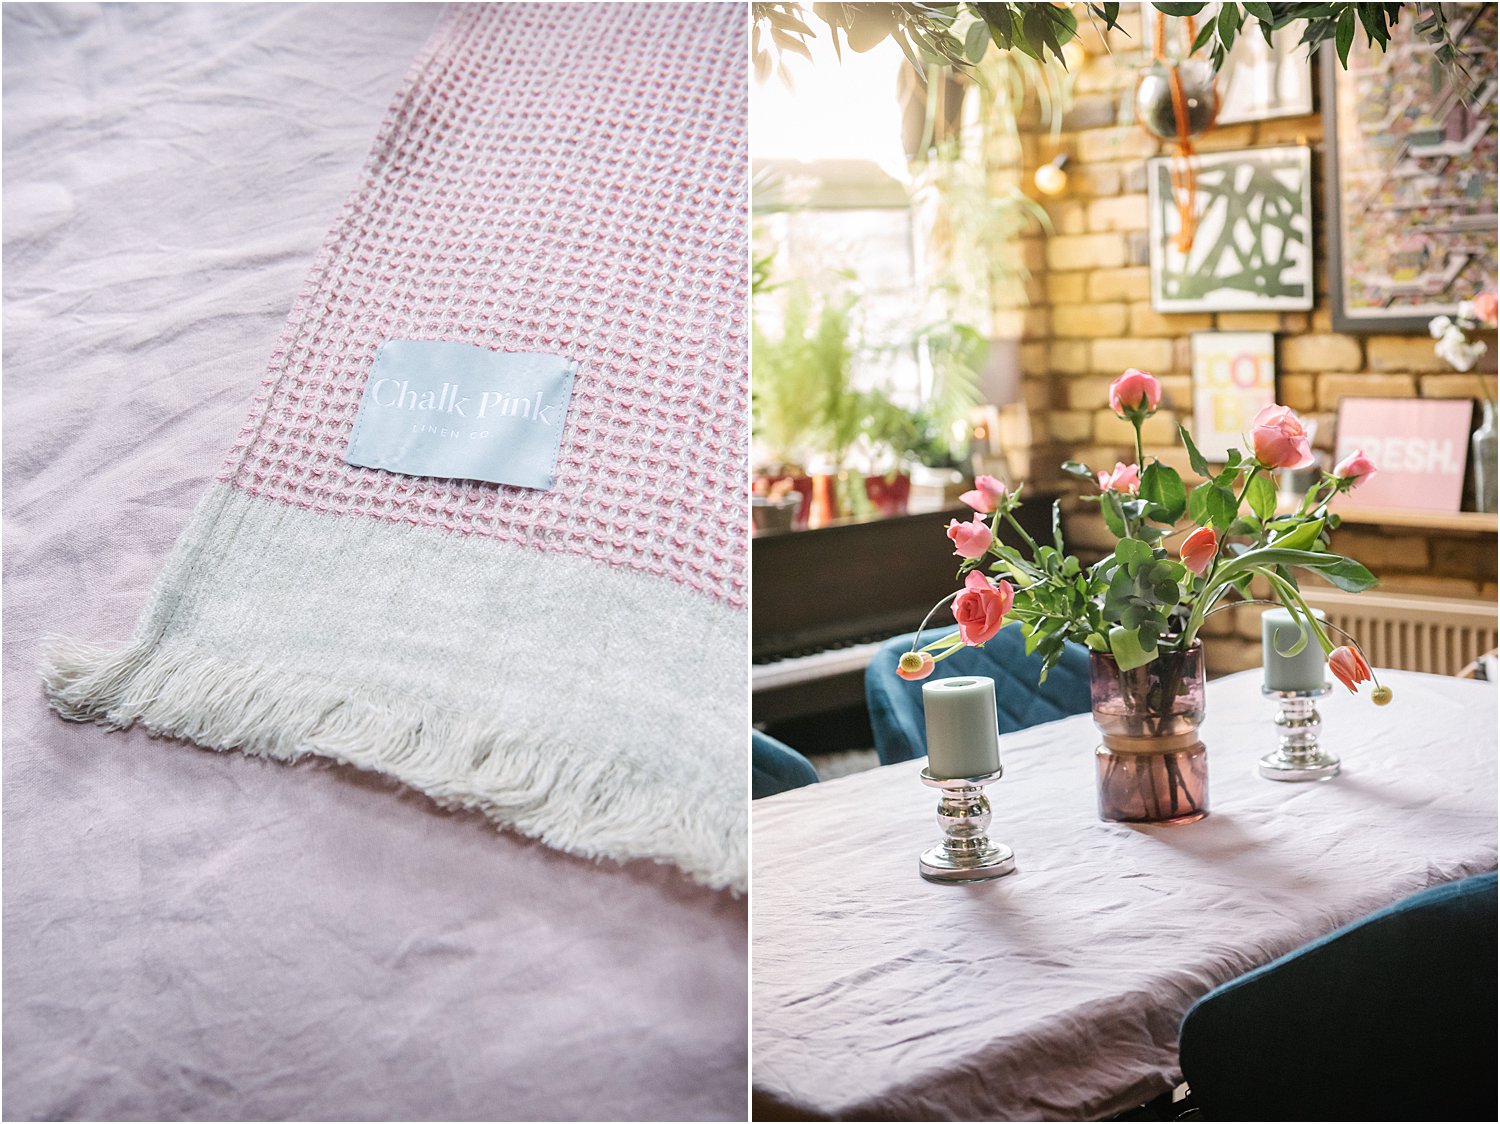 3-ways-transform-interiors-for-spring-chalk-pink-linen-company-layered-home